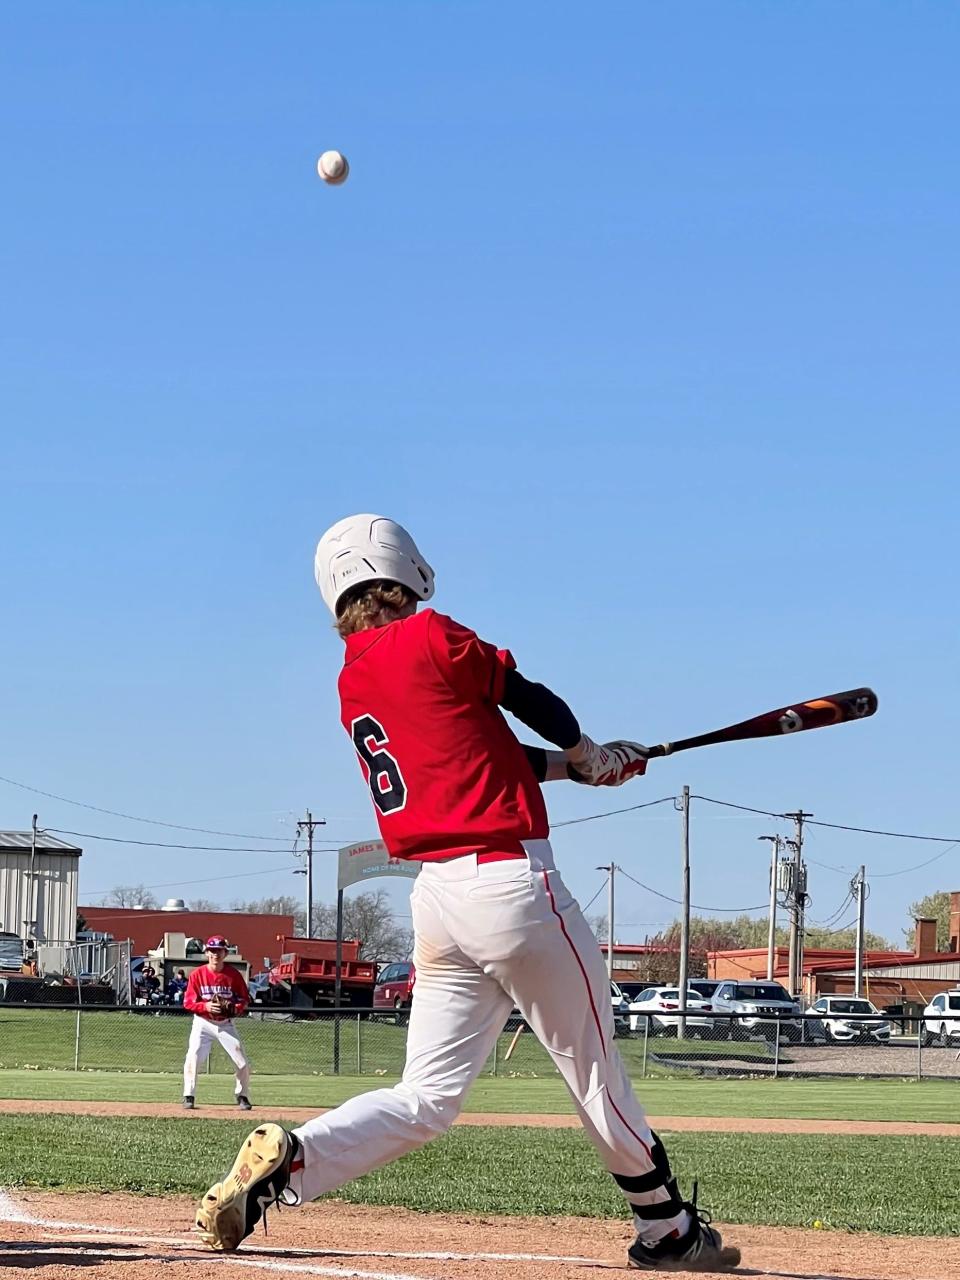 Elgin's Brody Wood hits the ball during a baseball game at Ridgedale last year. Wood is the reigning Marion Star Baseball Player of the Year.